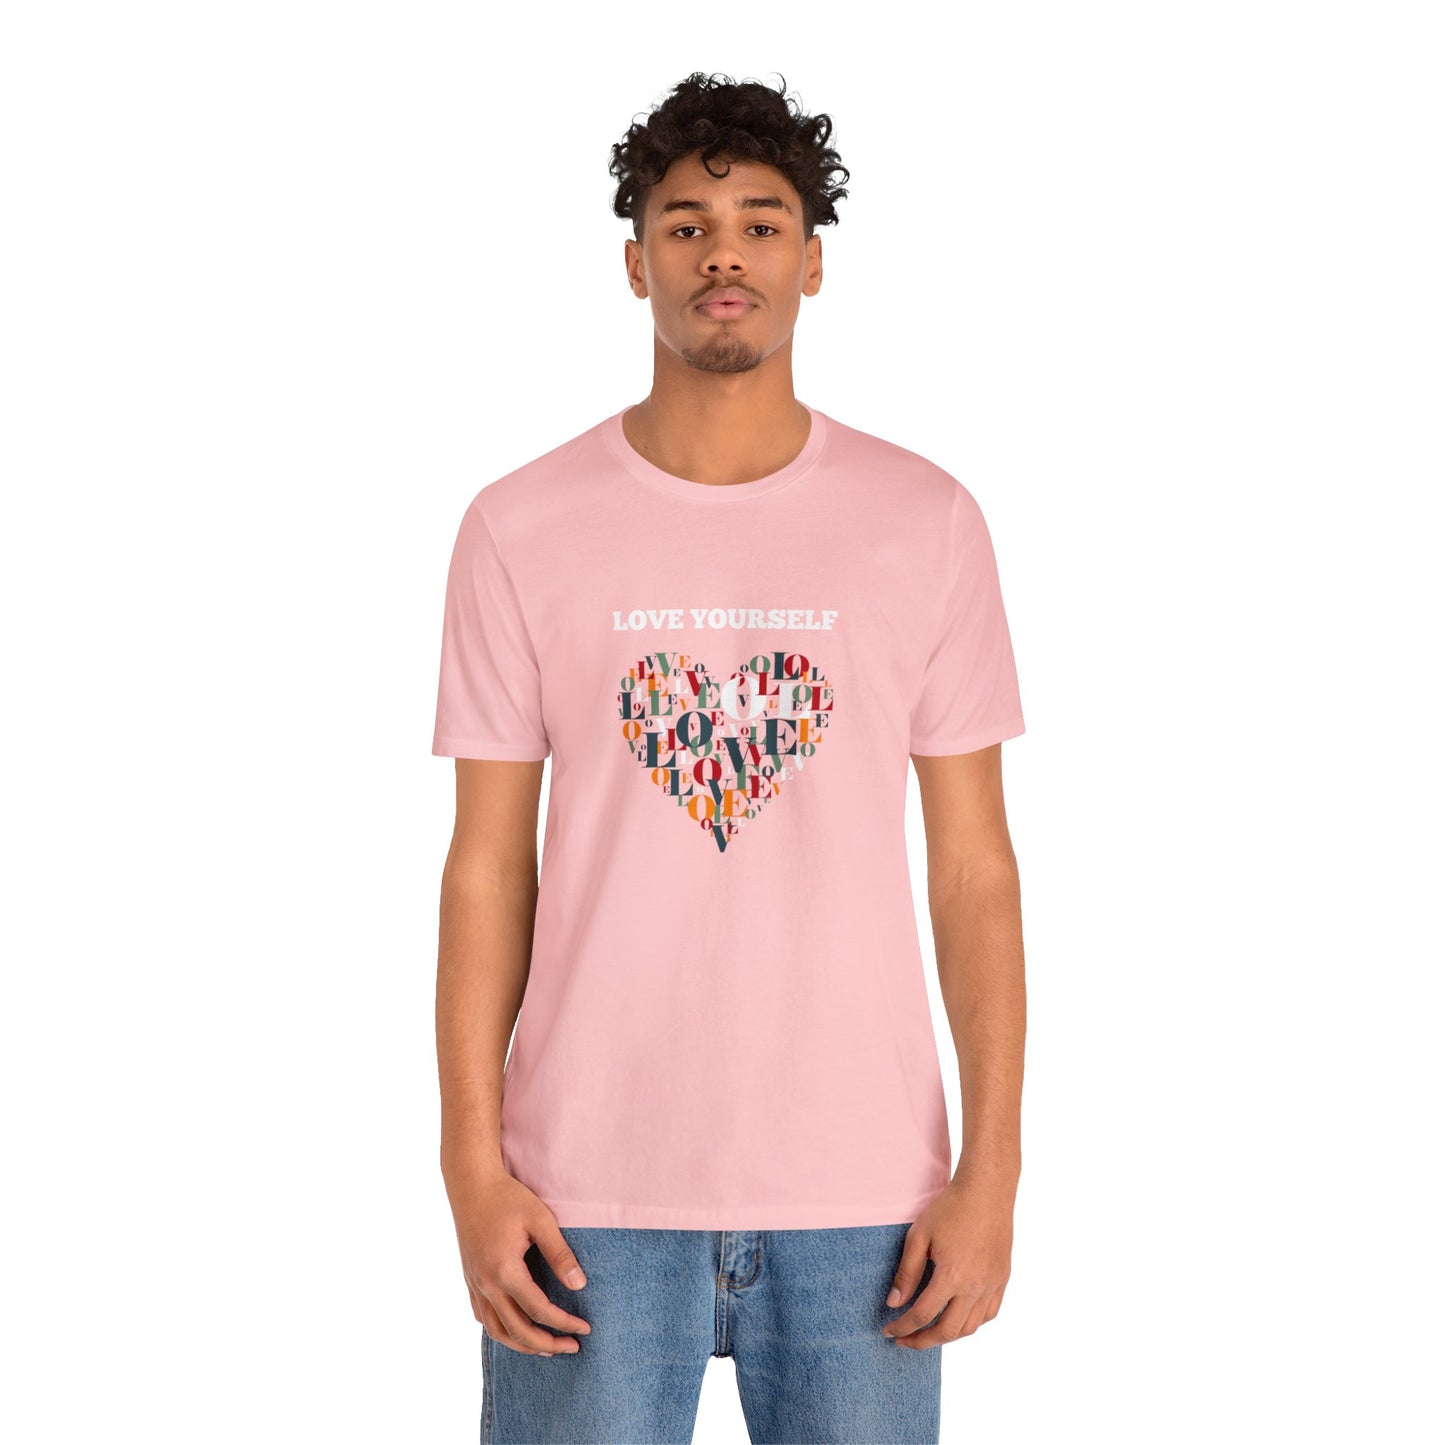 Love Yourself - Inspirational T Shirt for Men and For Women